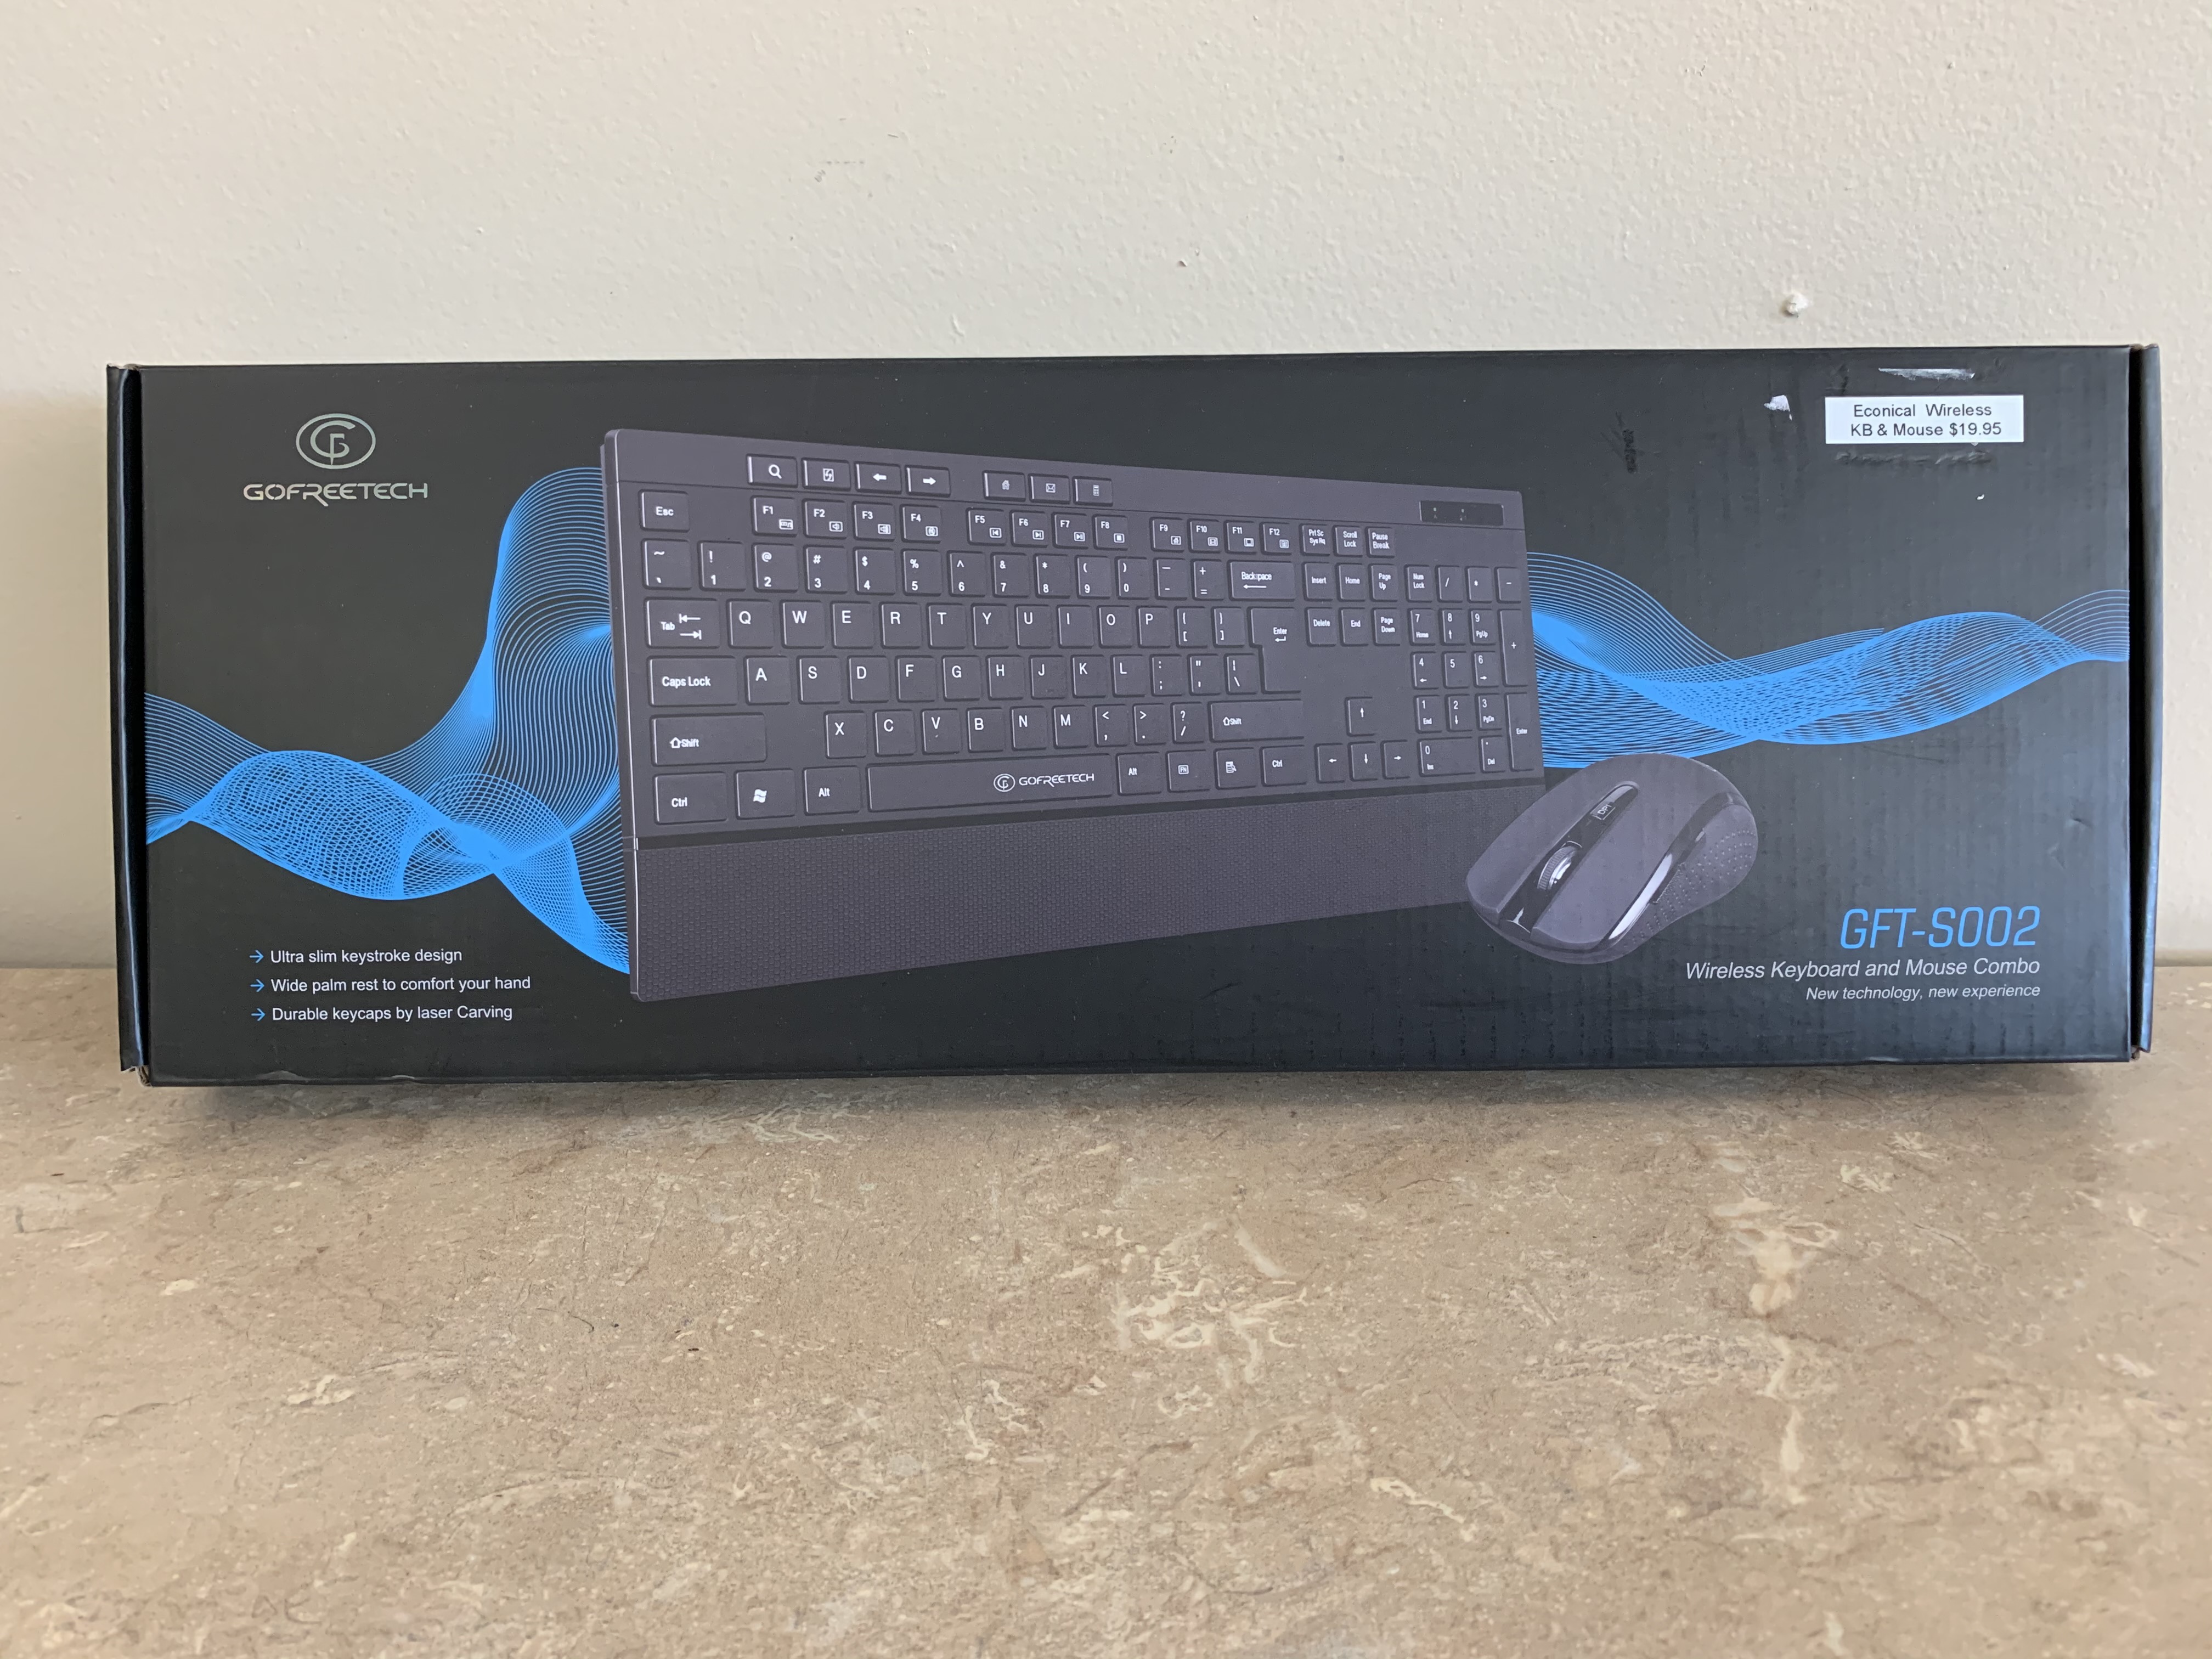 GoFree-Tech-Wireless-Keyboard-and-Mouse